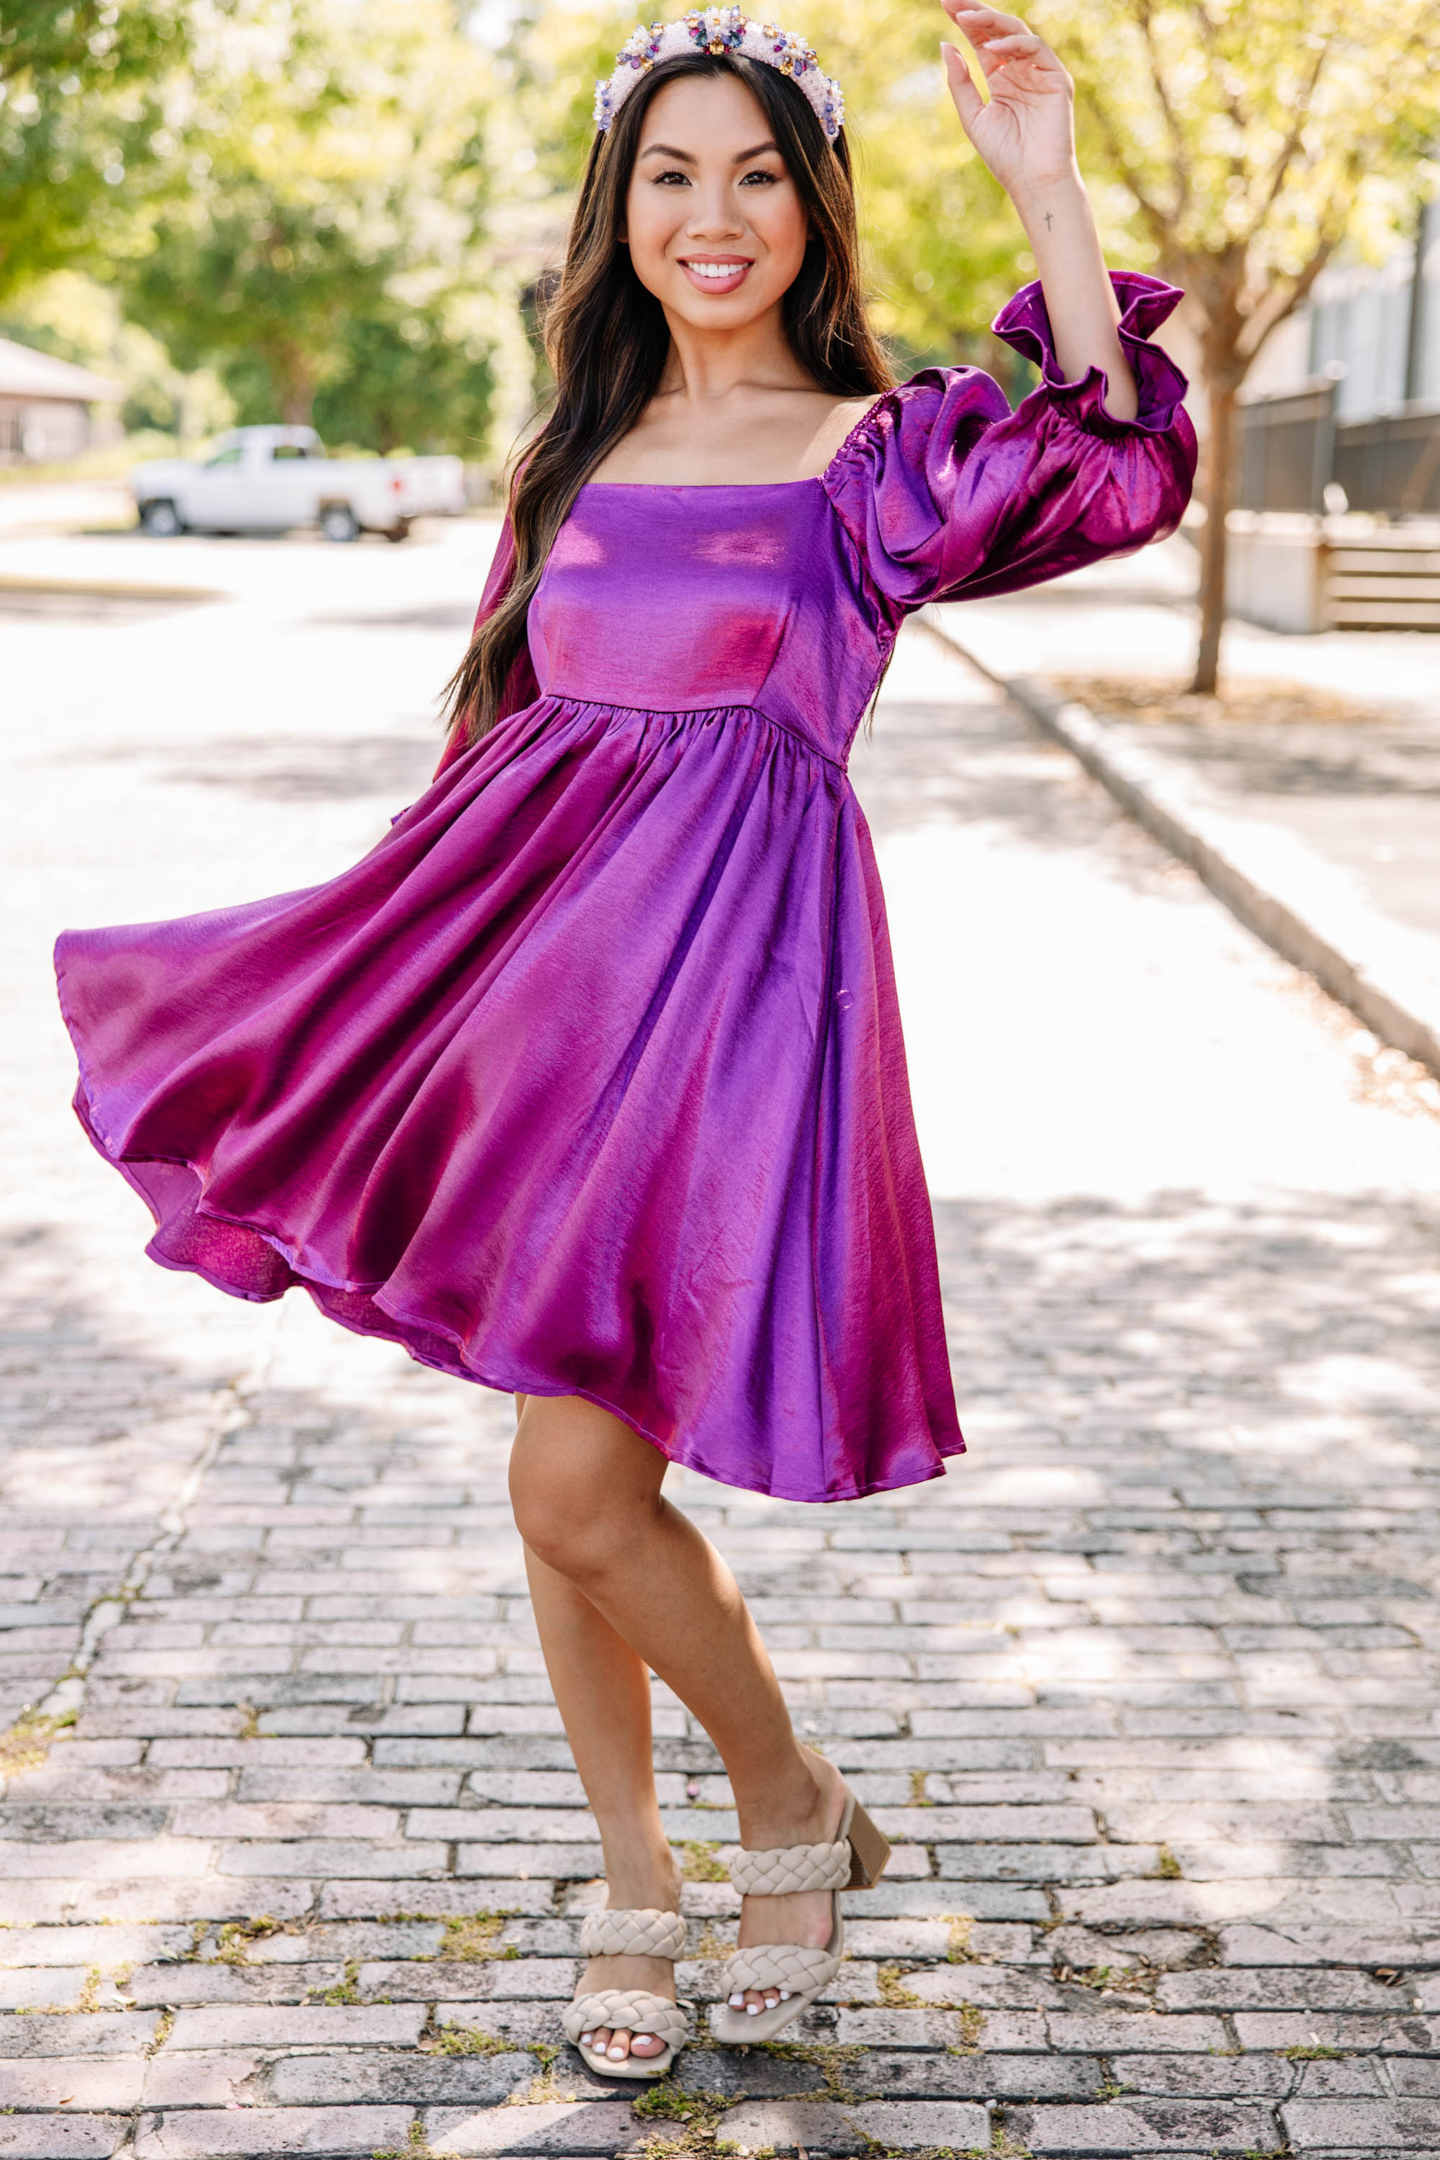 https://shopthemint.com/products/in-your-sights-sangria-purple-satin-babydoll-dress?variant=39666270699578